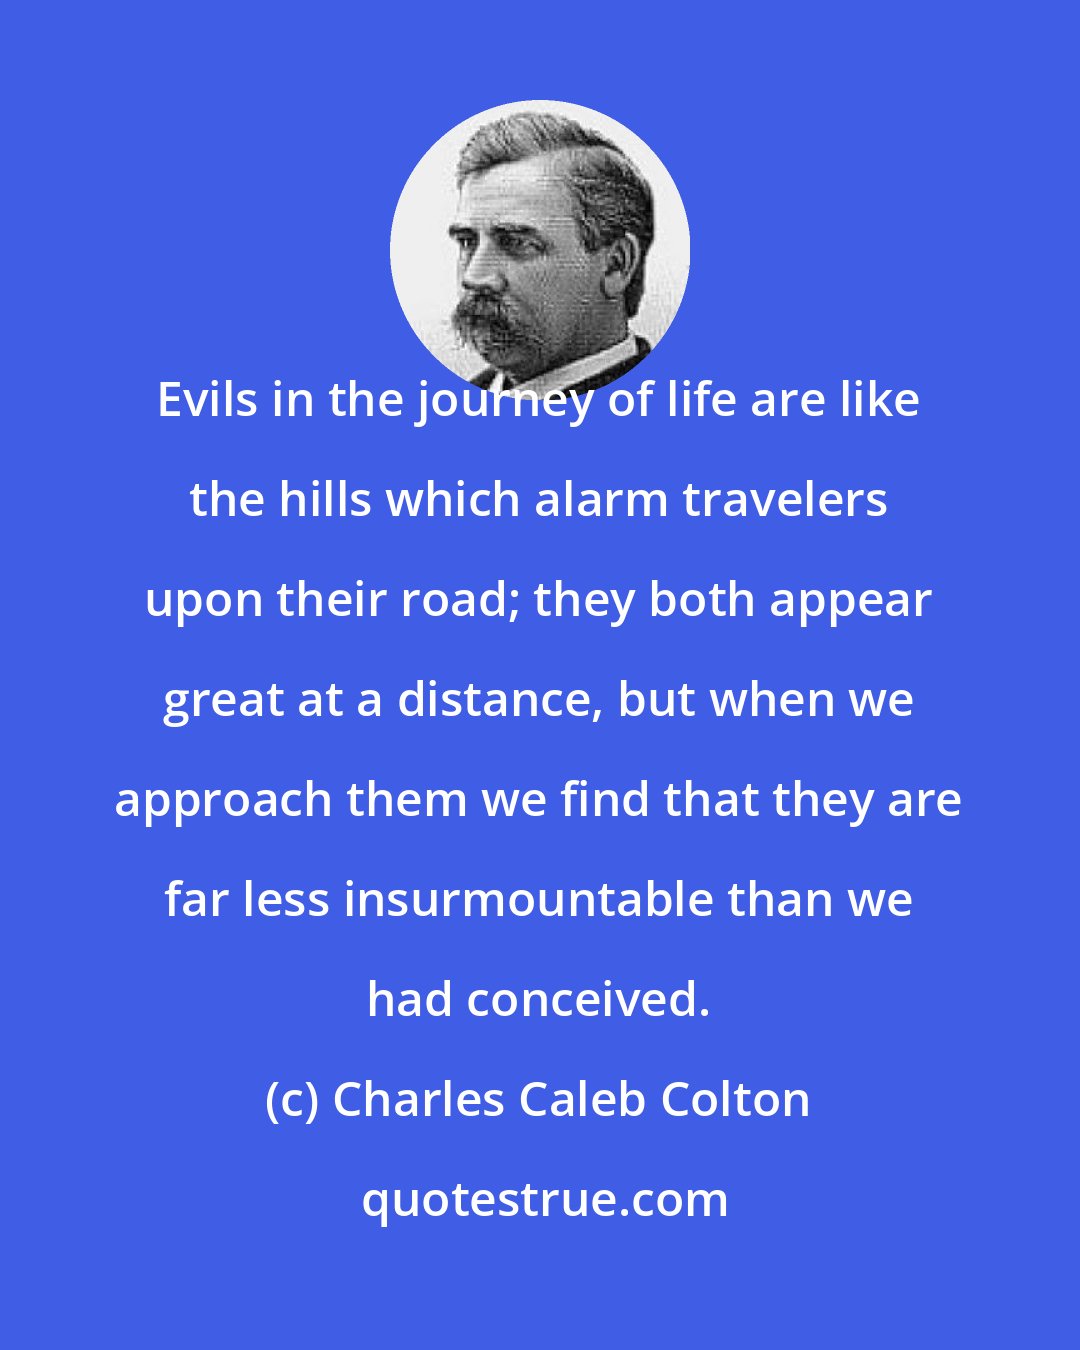 Charles Caleb Colton: Evils in the journey of life are like the hills which alarm travelers upon their road; they both appear great at a distance, but when we approach them we find that they are far less insurmountable than we had conceived.